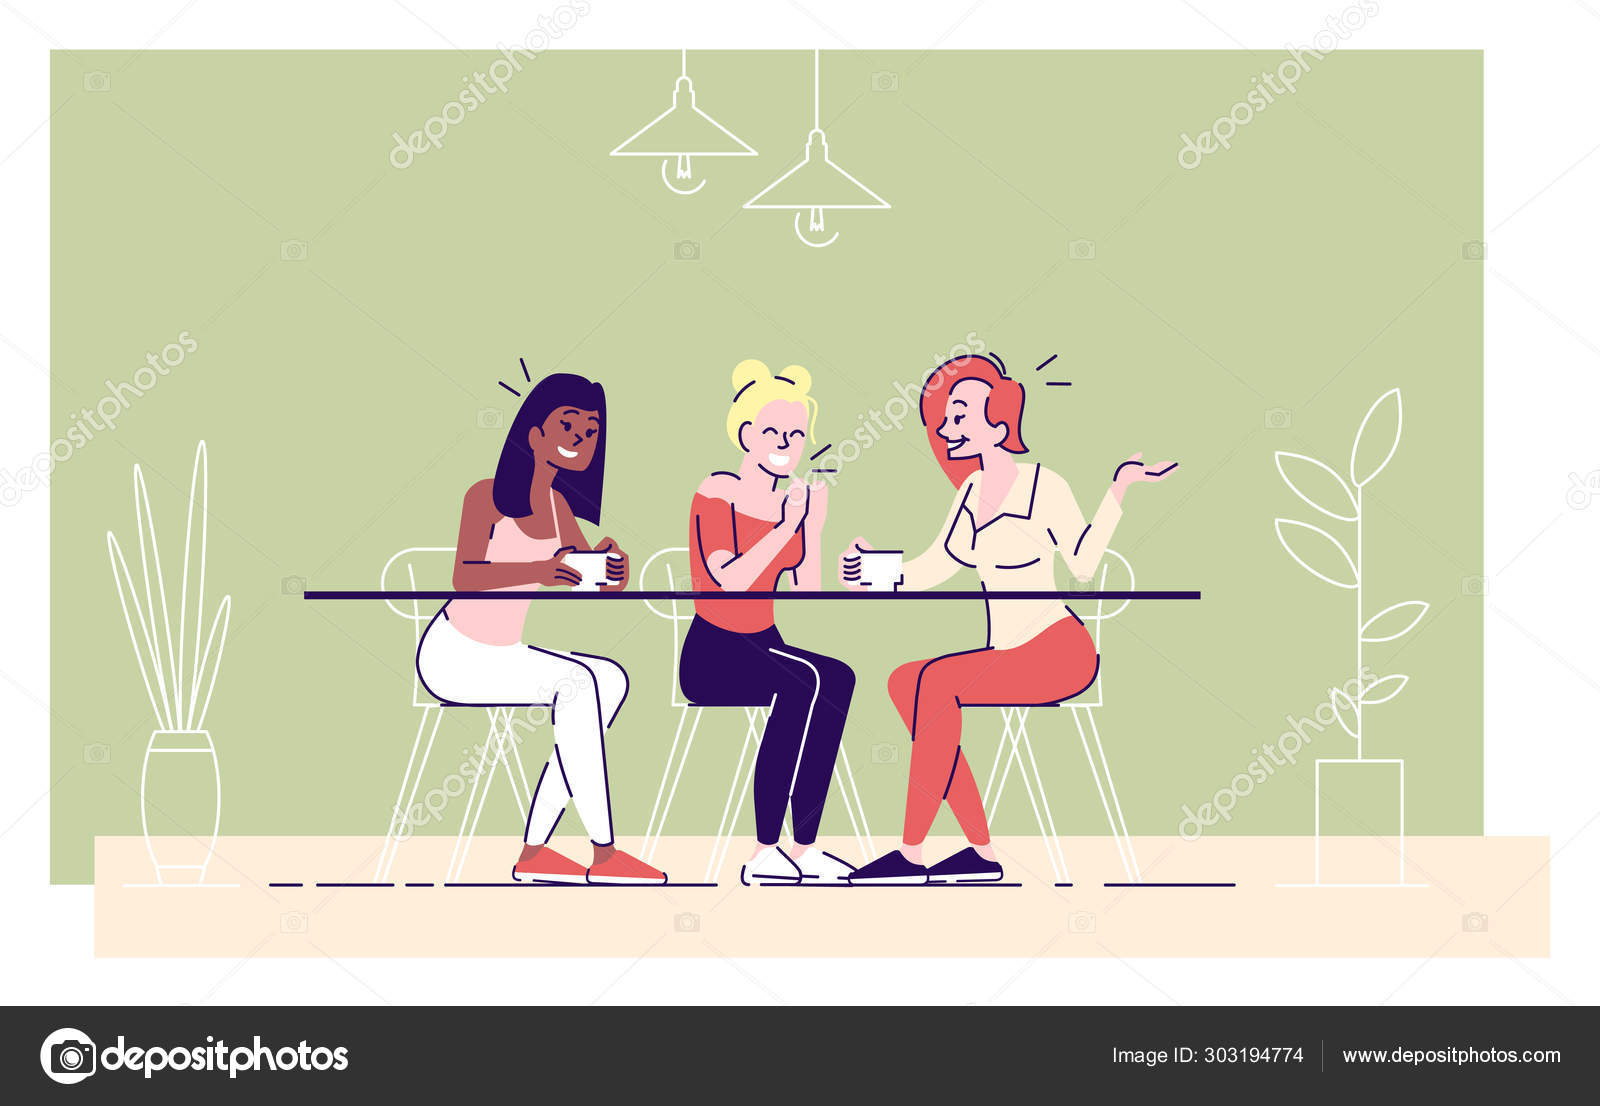 Girls Drink Coffee In Cafe Flat Vector Illustration Young Ladies Enjoy Tea Cheerful Women Discussing Latest News Gossiping Cartoon Characters With Outline Elements On Green Background Vector Image By C Bsd